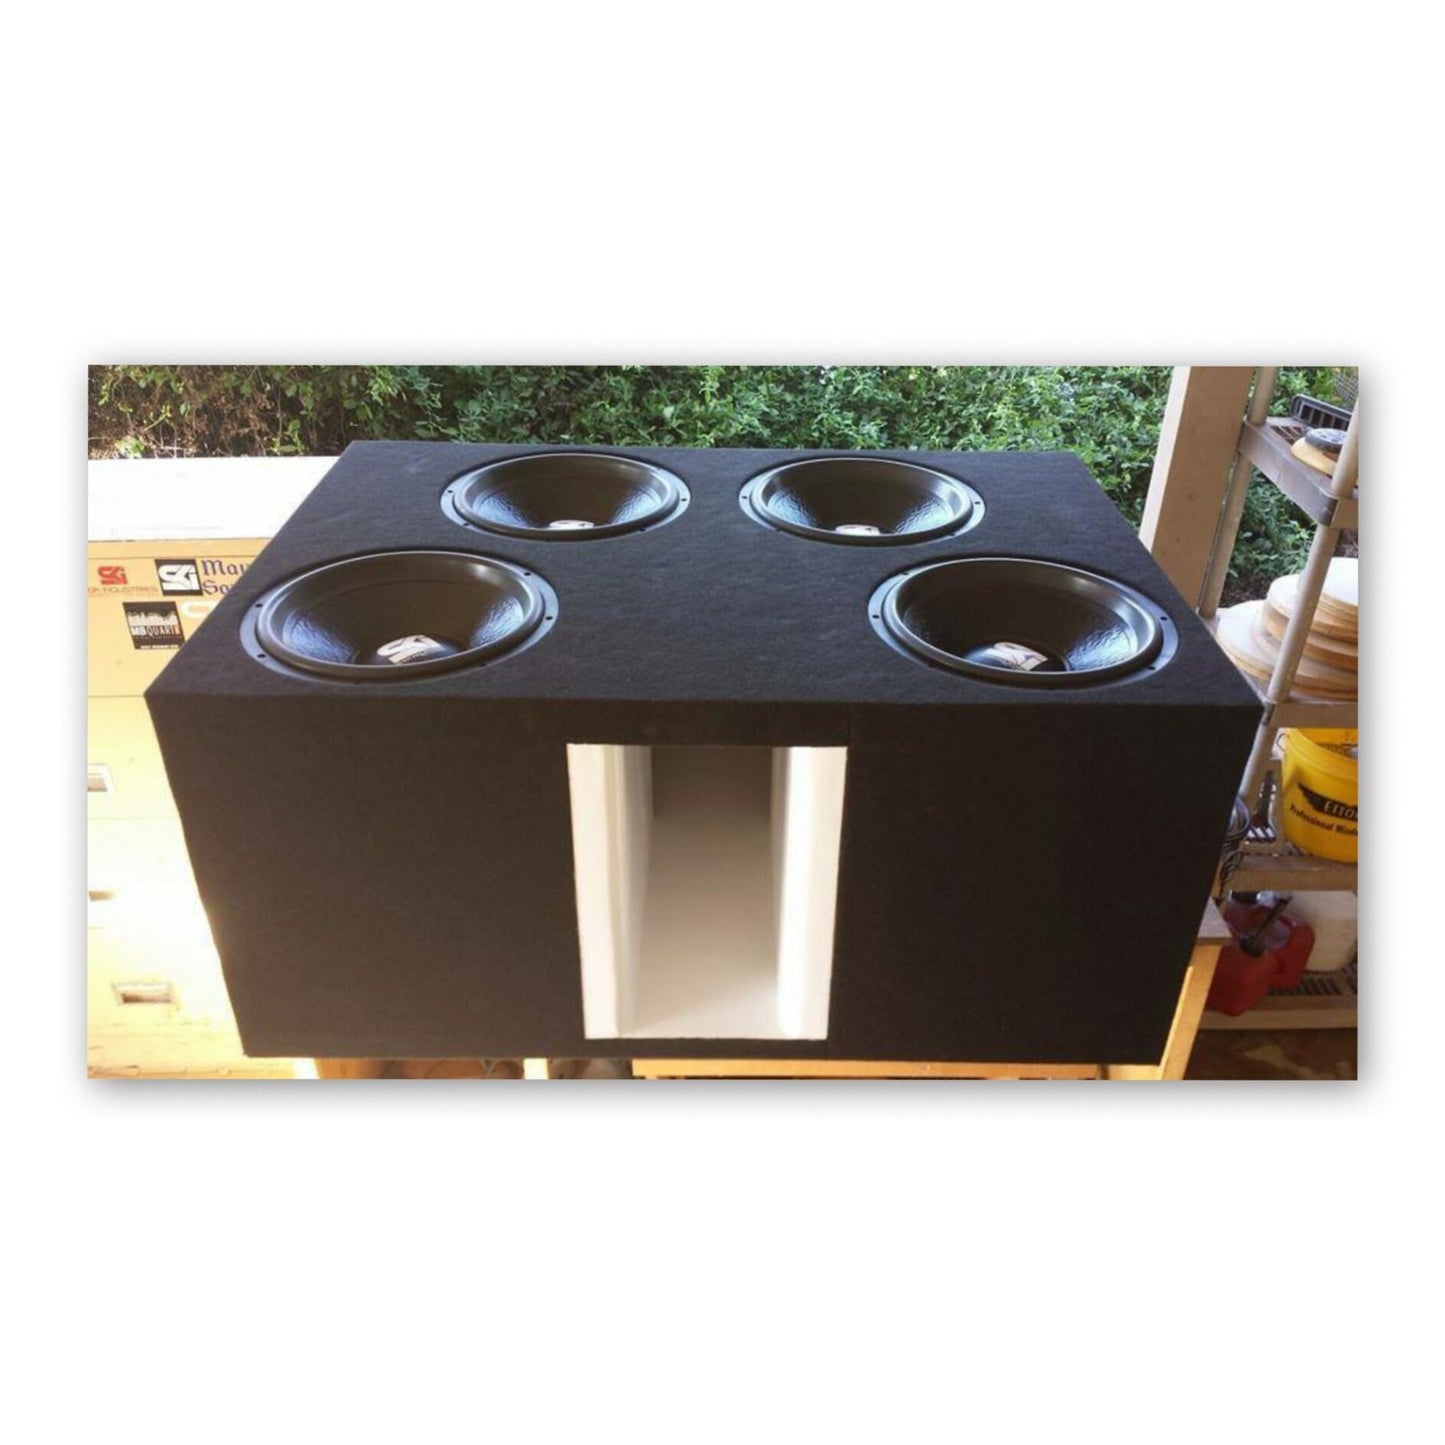 CUSTOM SPEAKER BOXES EMAIL FOR A QUOTE.